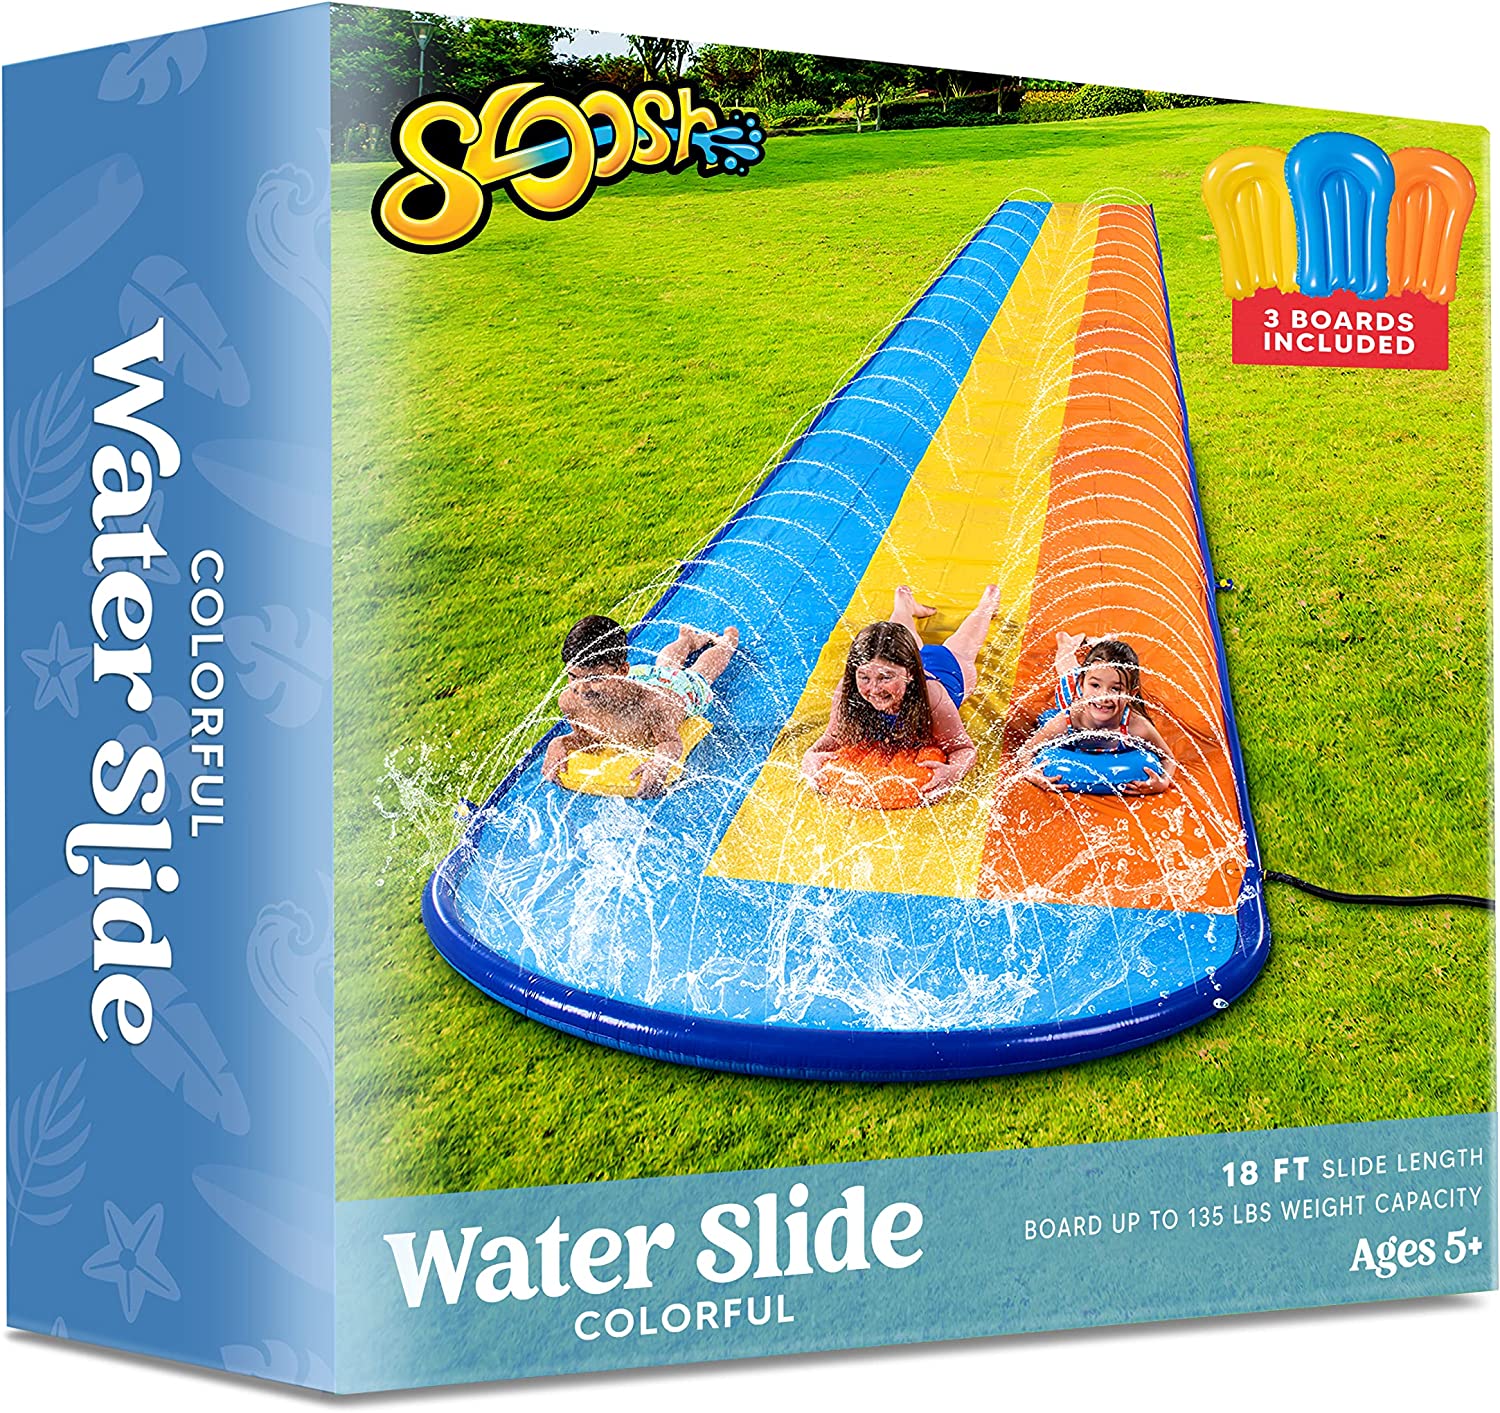 18ft/22.5ft Triple Lanes Water Slide and 3 Boogie Boards